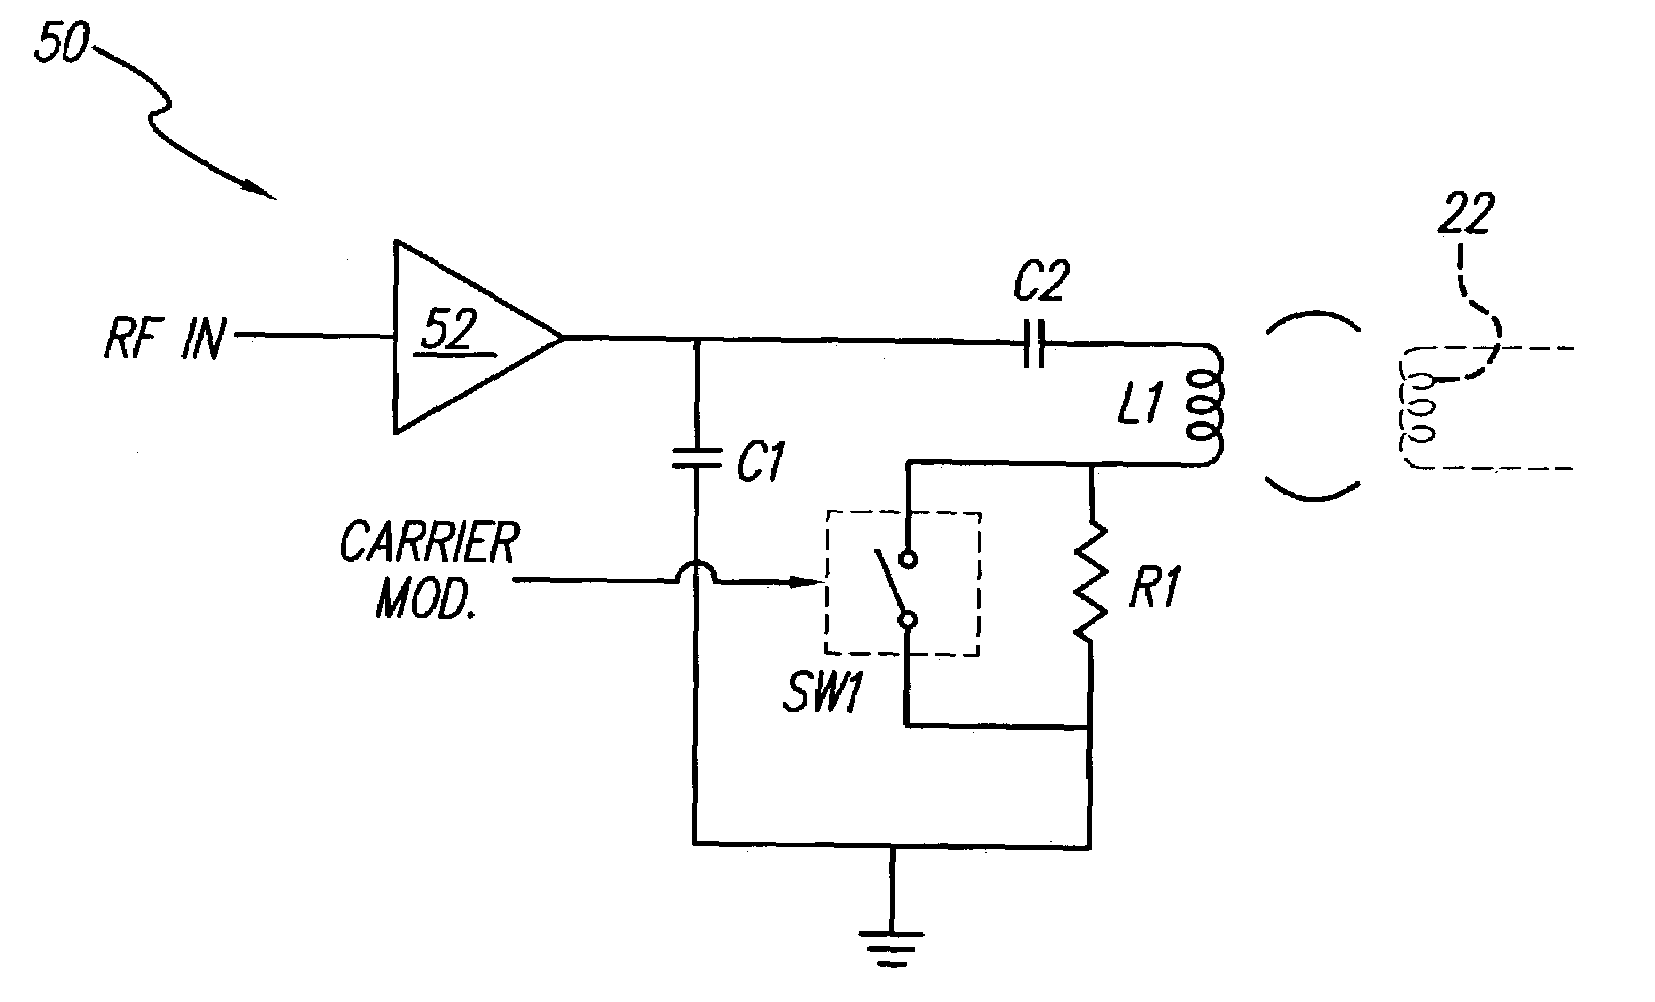 Low-power, high-modulation-index amplifier for use in battery-powered device